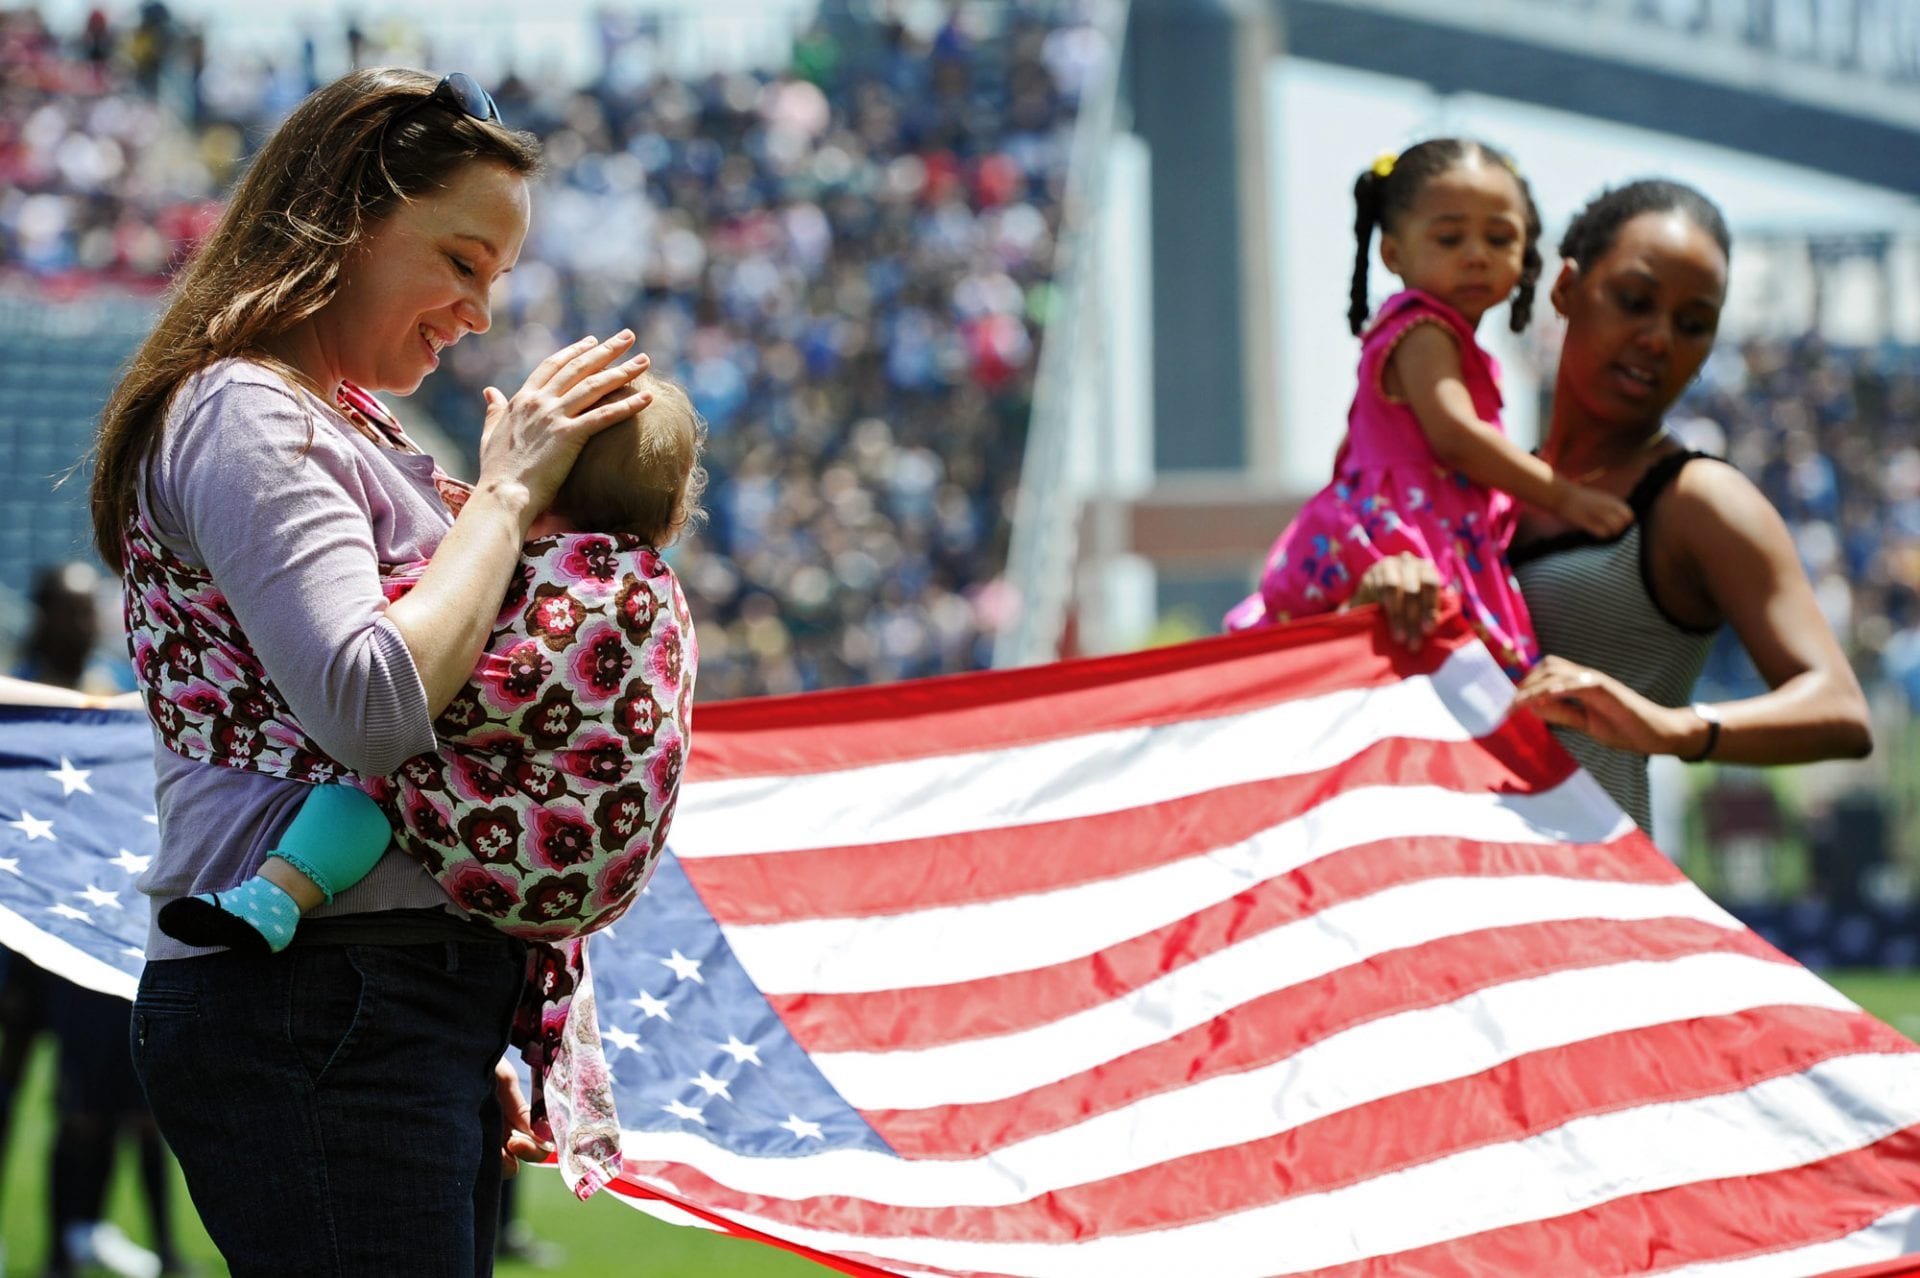 A Brief History of Mother's Day in America